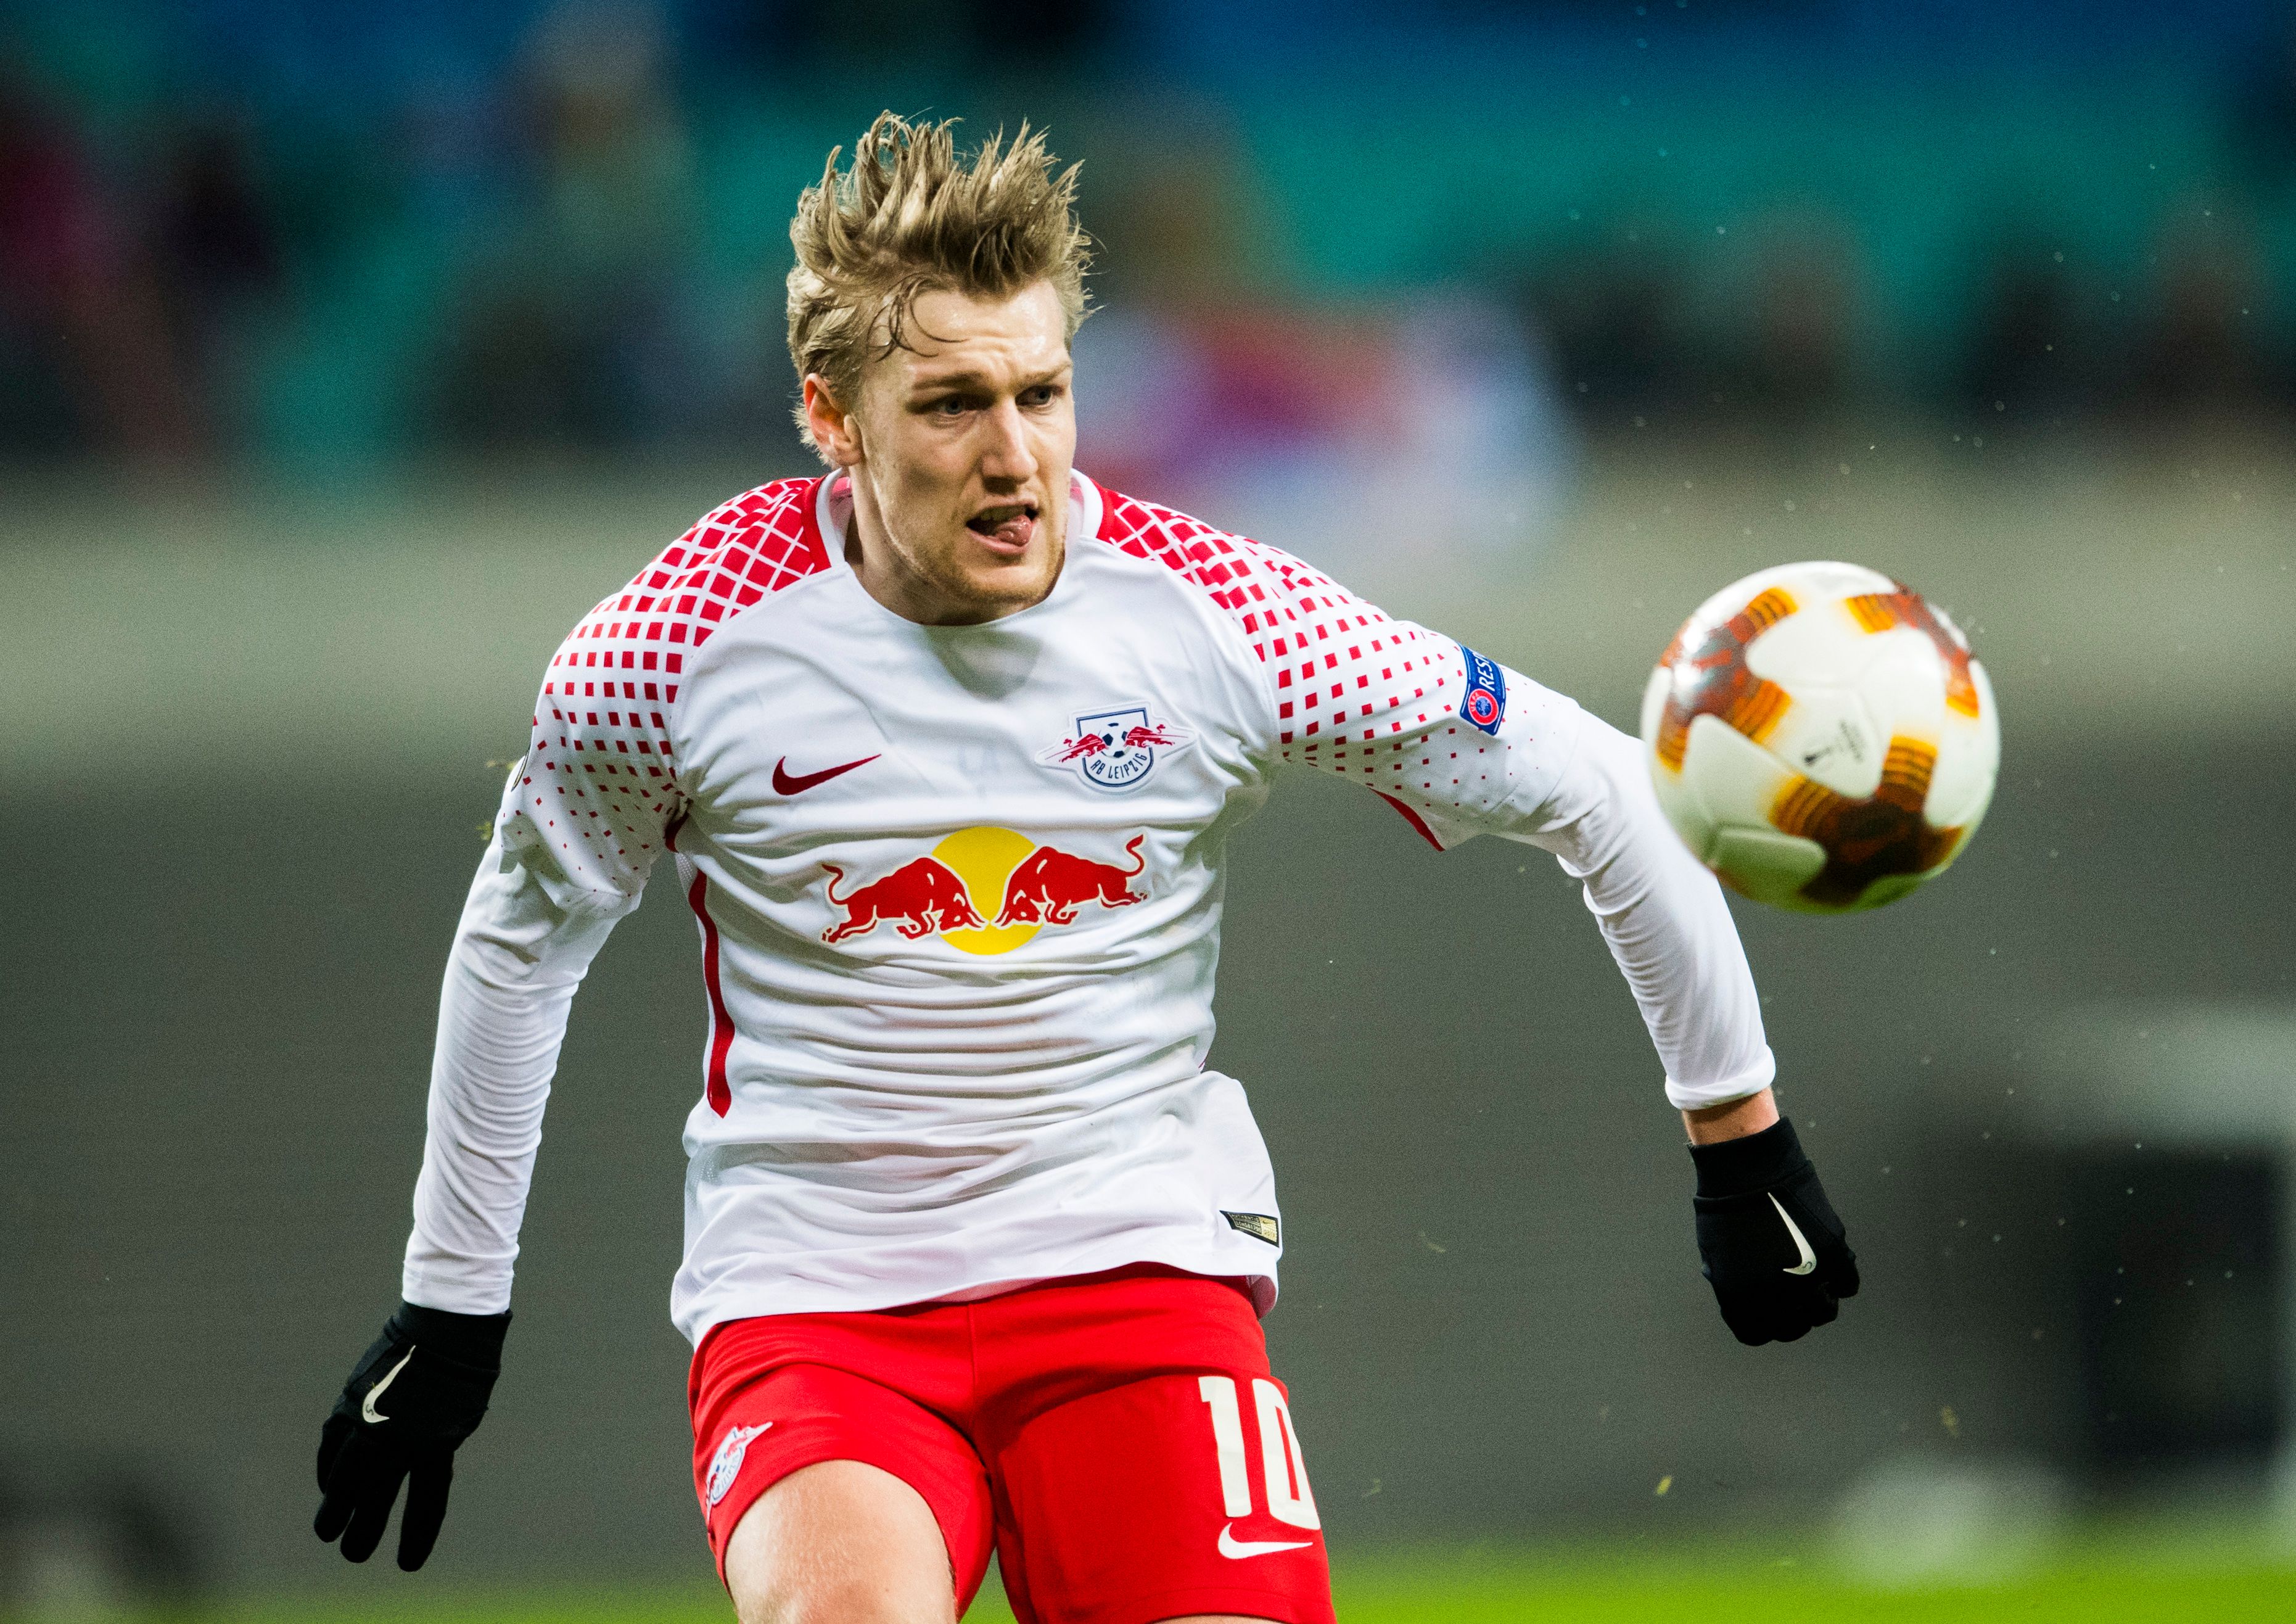 Leipzig's Swedish forward Emil Forsberg plays the ball during the Europa League Round of 16 first leg football match between Zenit Saint Petersburg and RB Leipzig on March 8, 2018 in Leipzig, eastern Germany. / AFP PHOTO / ROBERT MICHAEL        (Photo credit should read ROBERT MICHAEL/AFP/Getty Images)